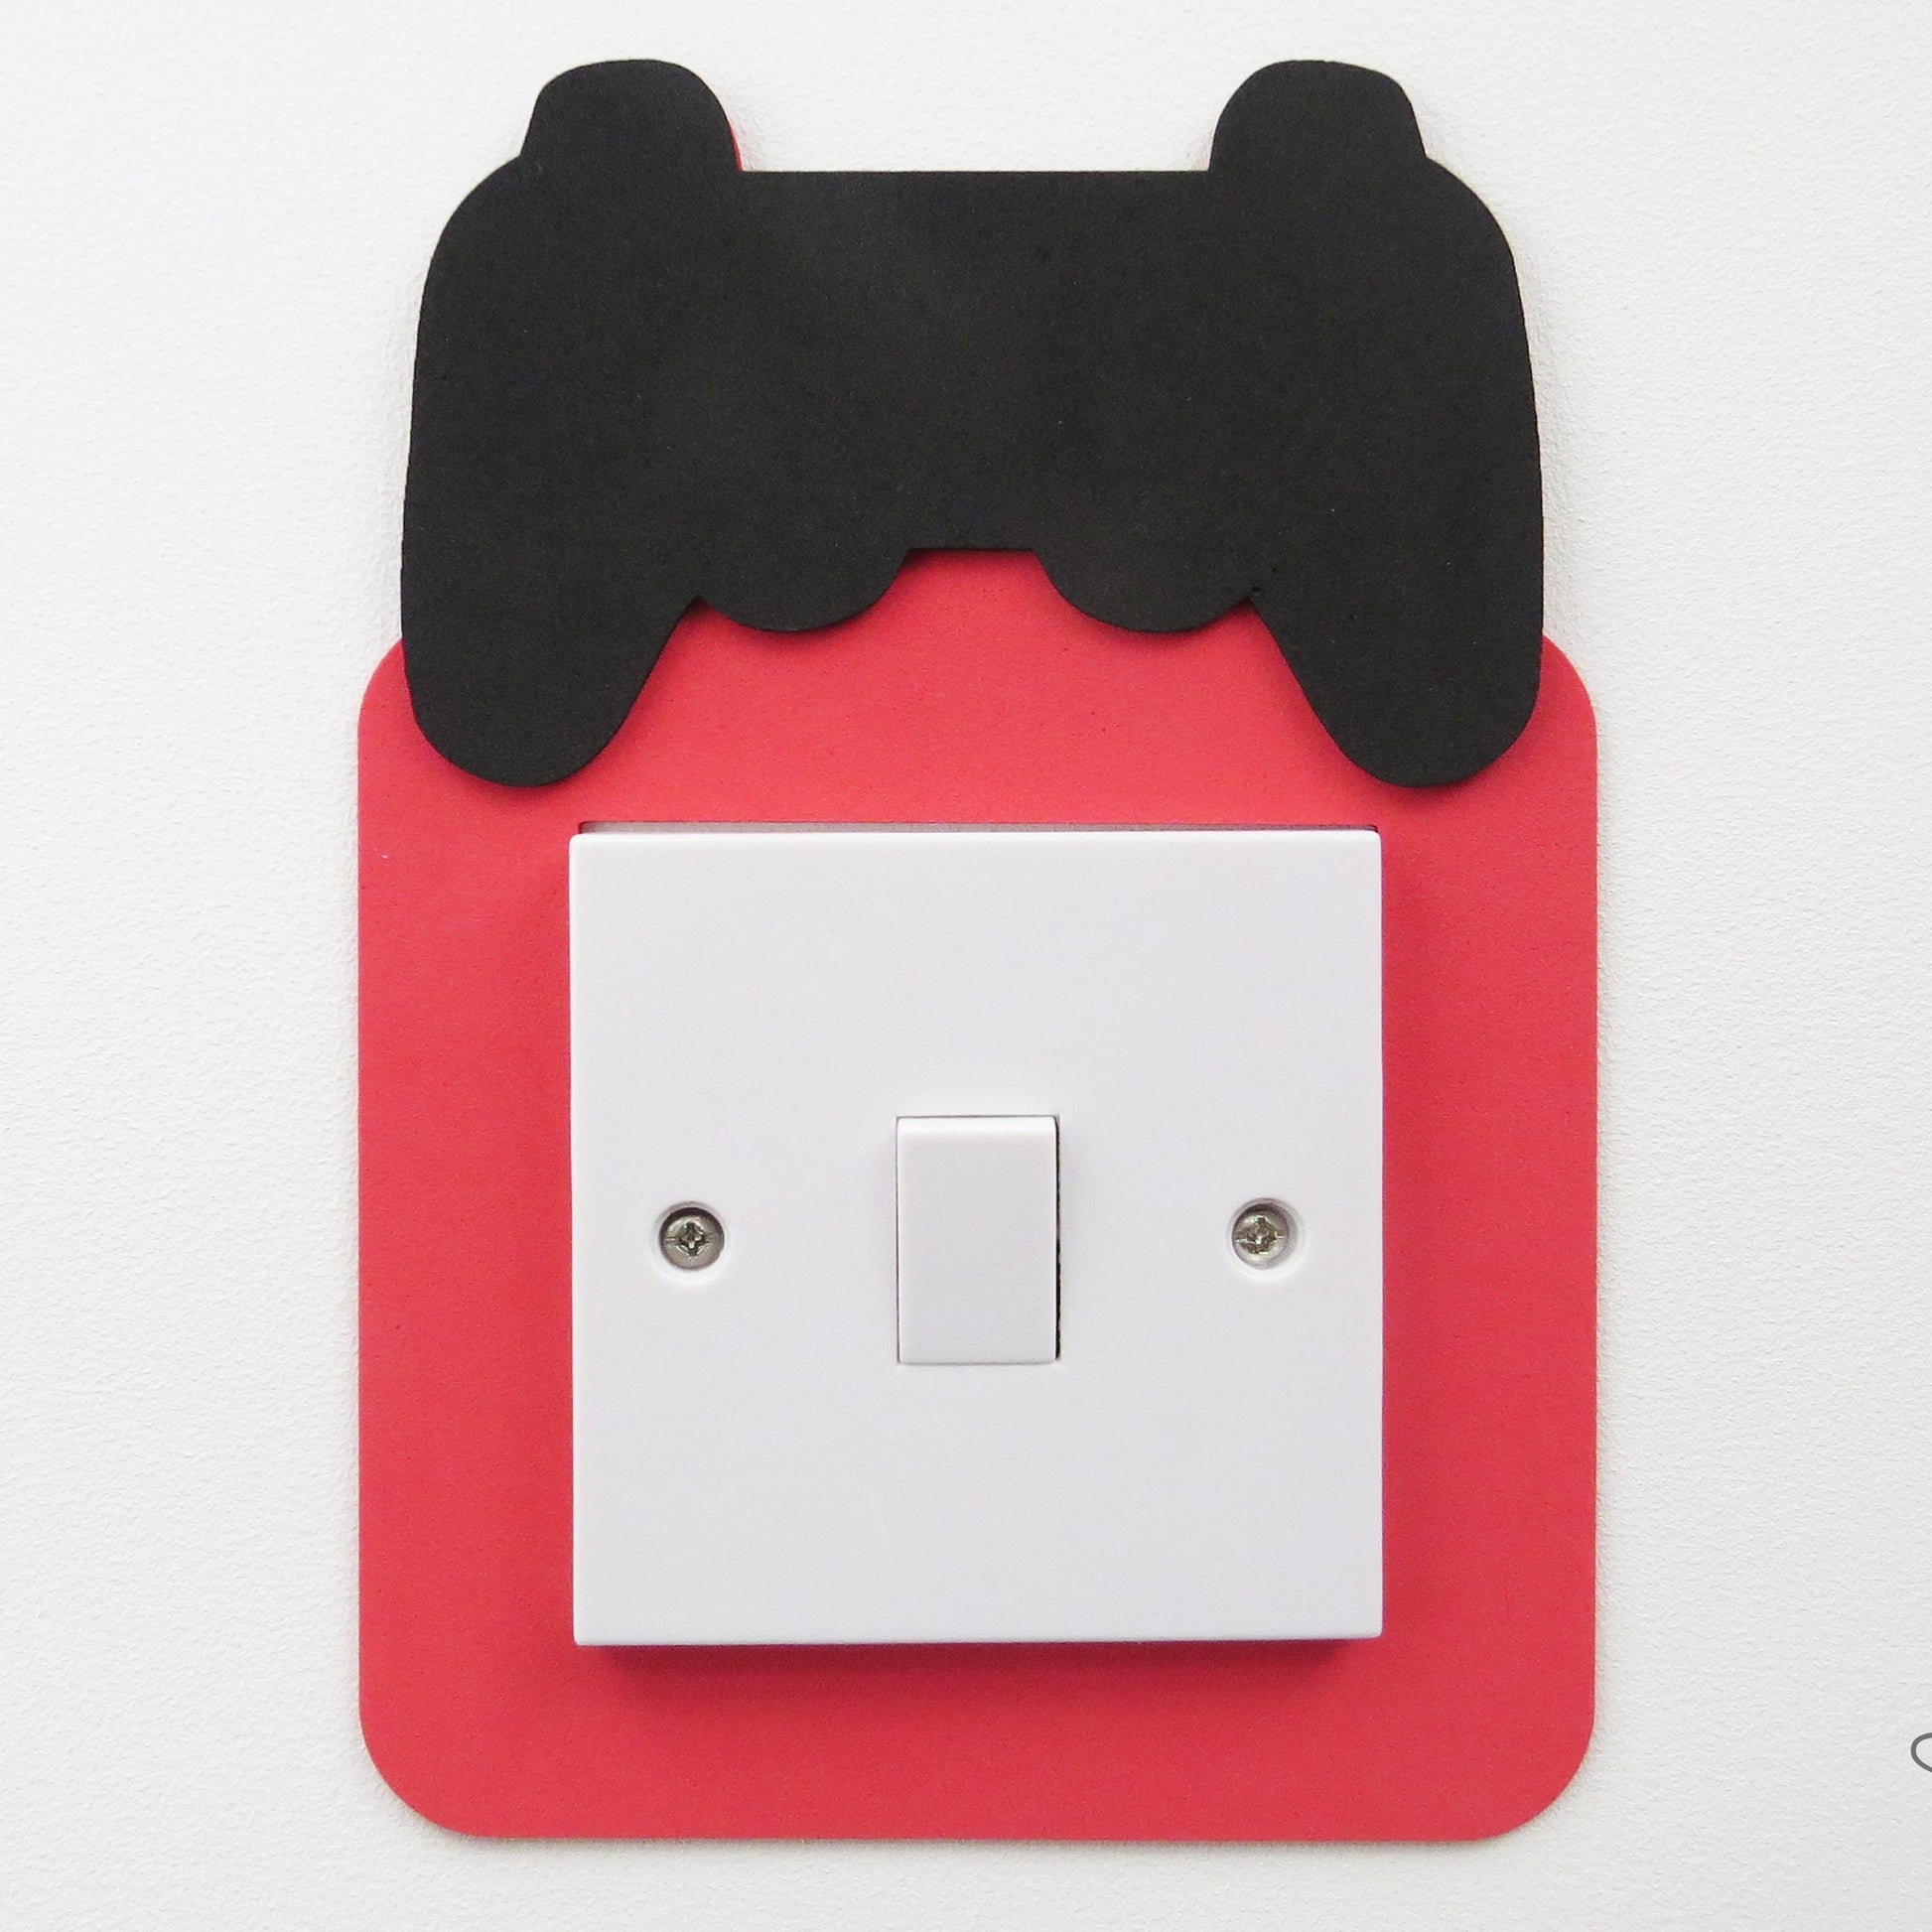 A childrens light switch surround in the shape of a gaming controller.